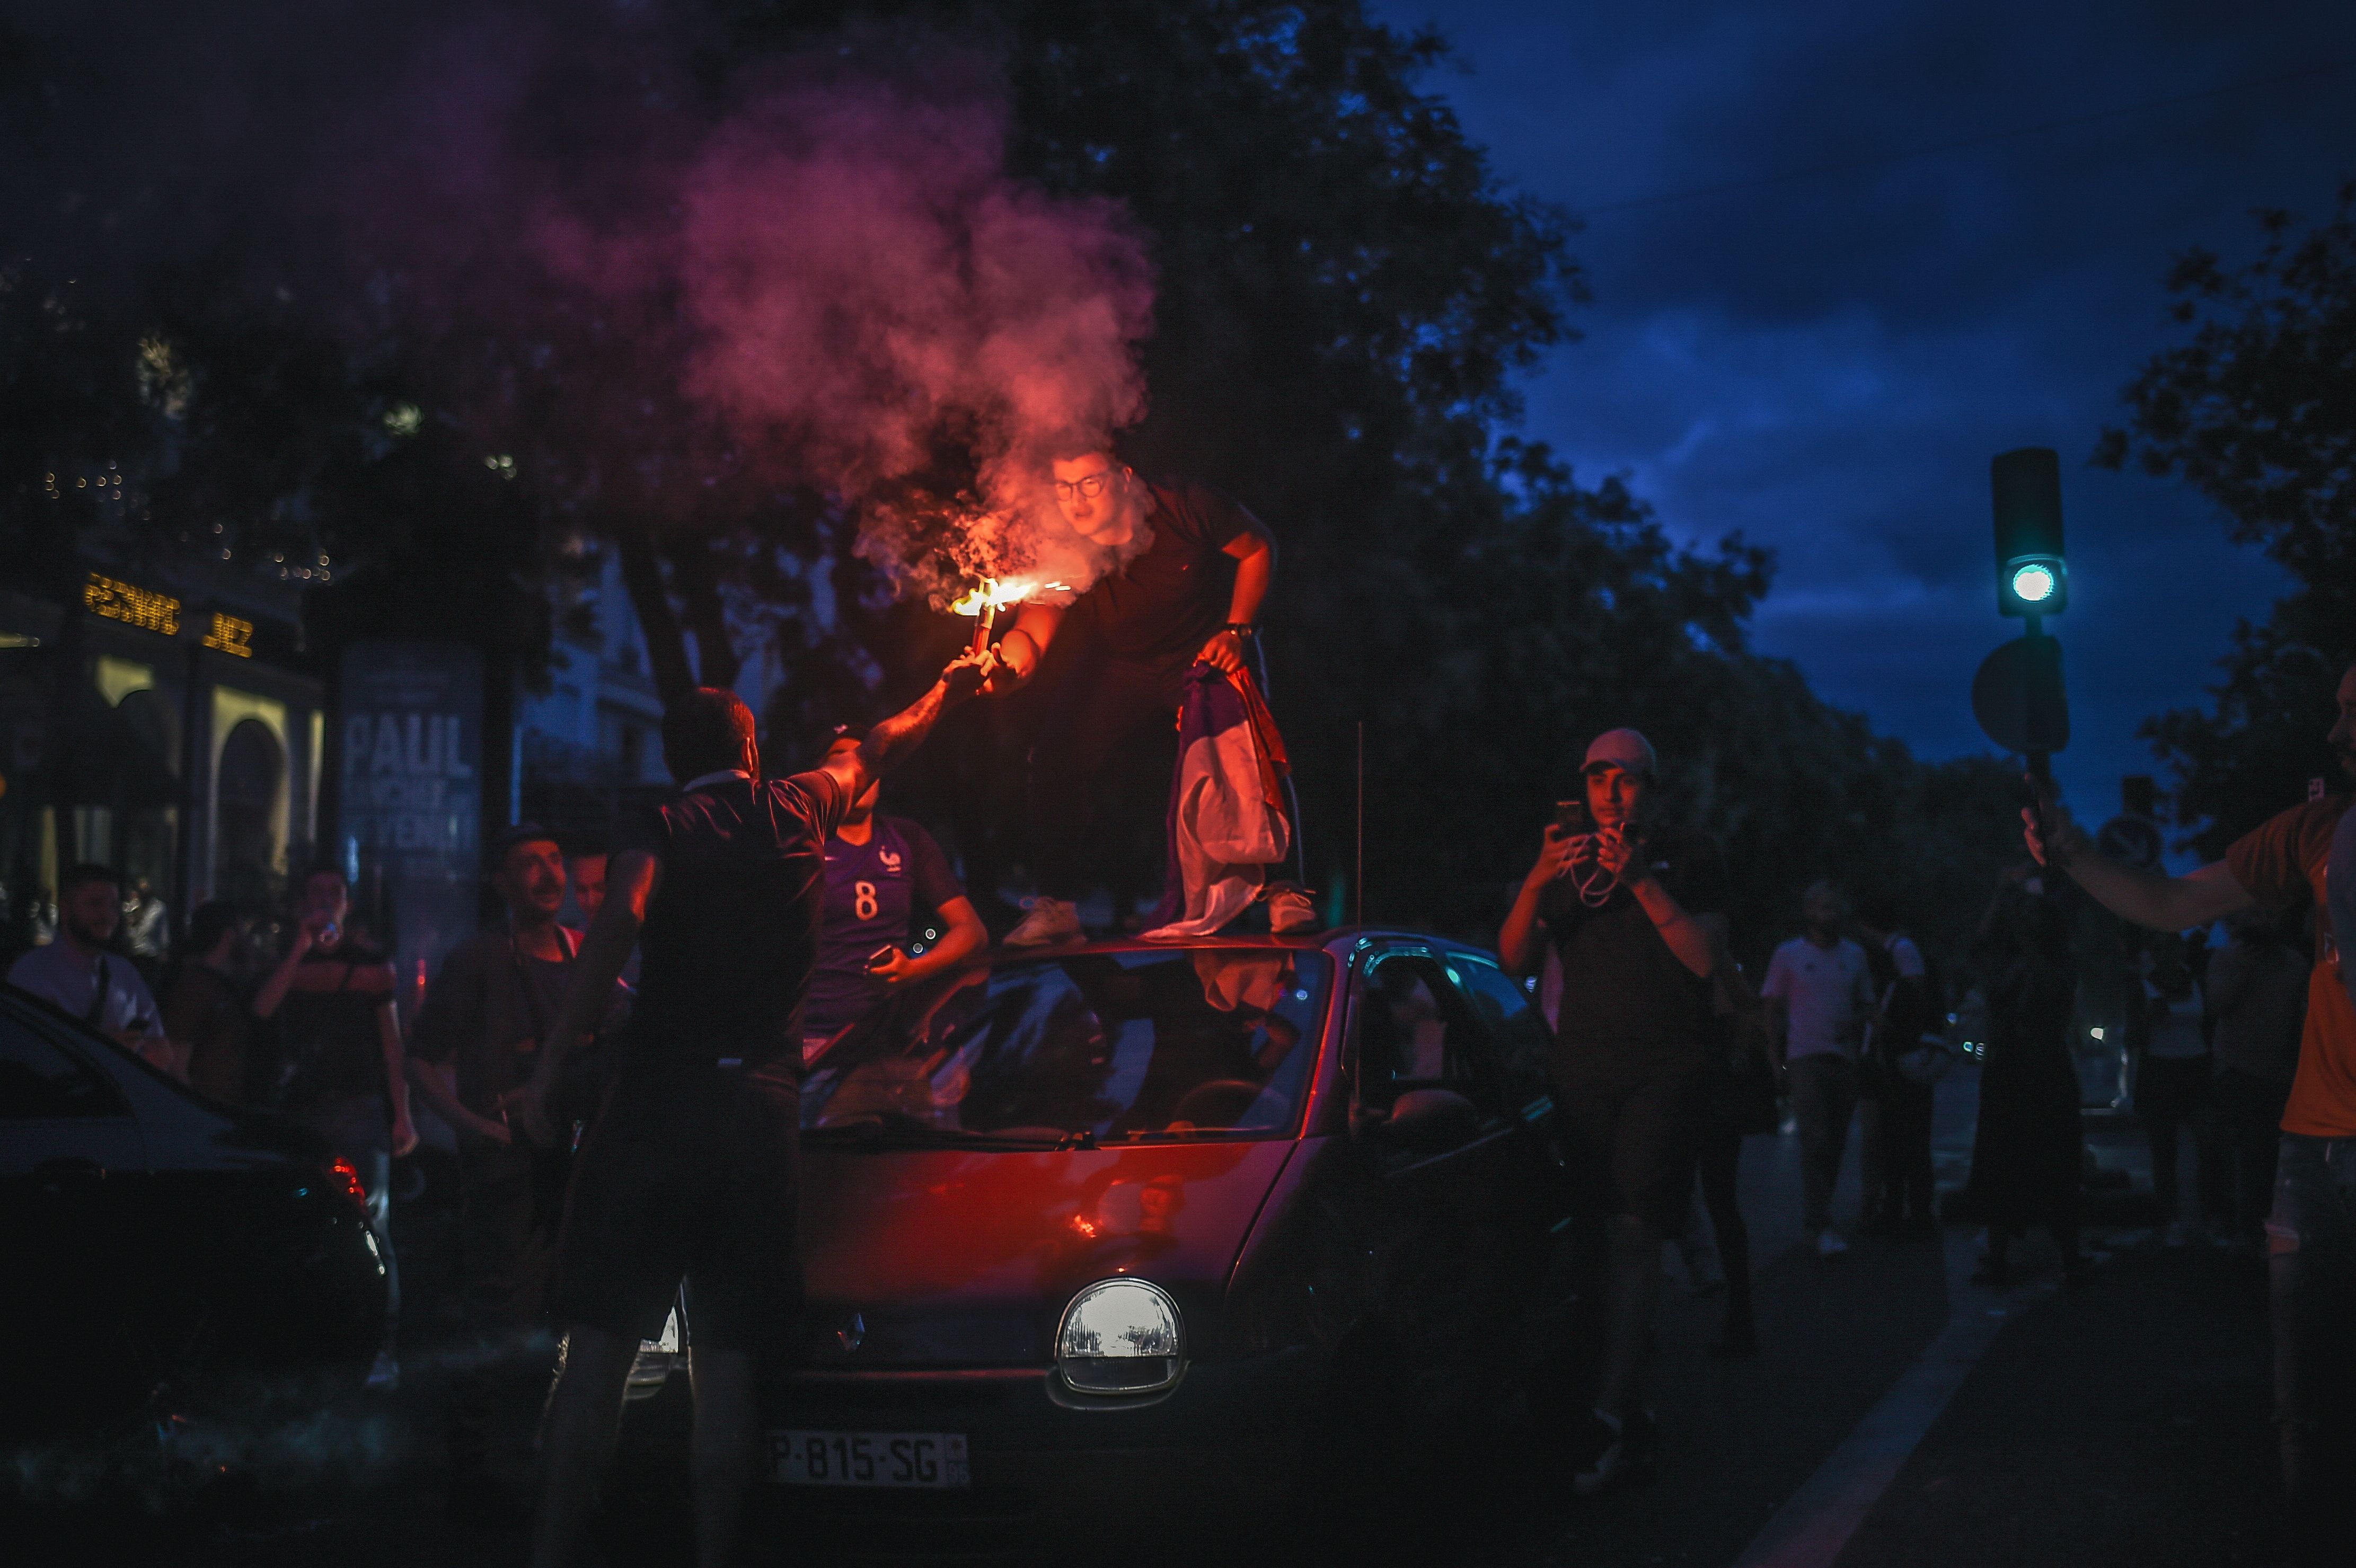 People celebrate France's victory on the Champs Elysees in Paris on July 10, 2018, after the final whistle of the Russia 2018 World Cup semi-final football match between France and Belgium. (Photo by Lucas BARIOULET / AFP) (Photo credit should read LUCAS BARIOULET/AFP/Getty Images)